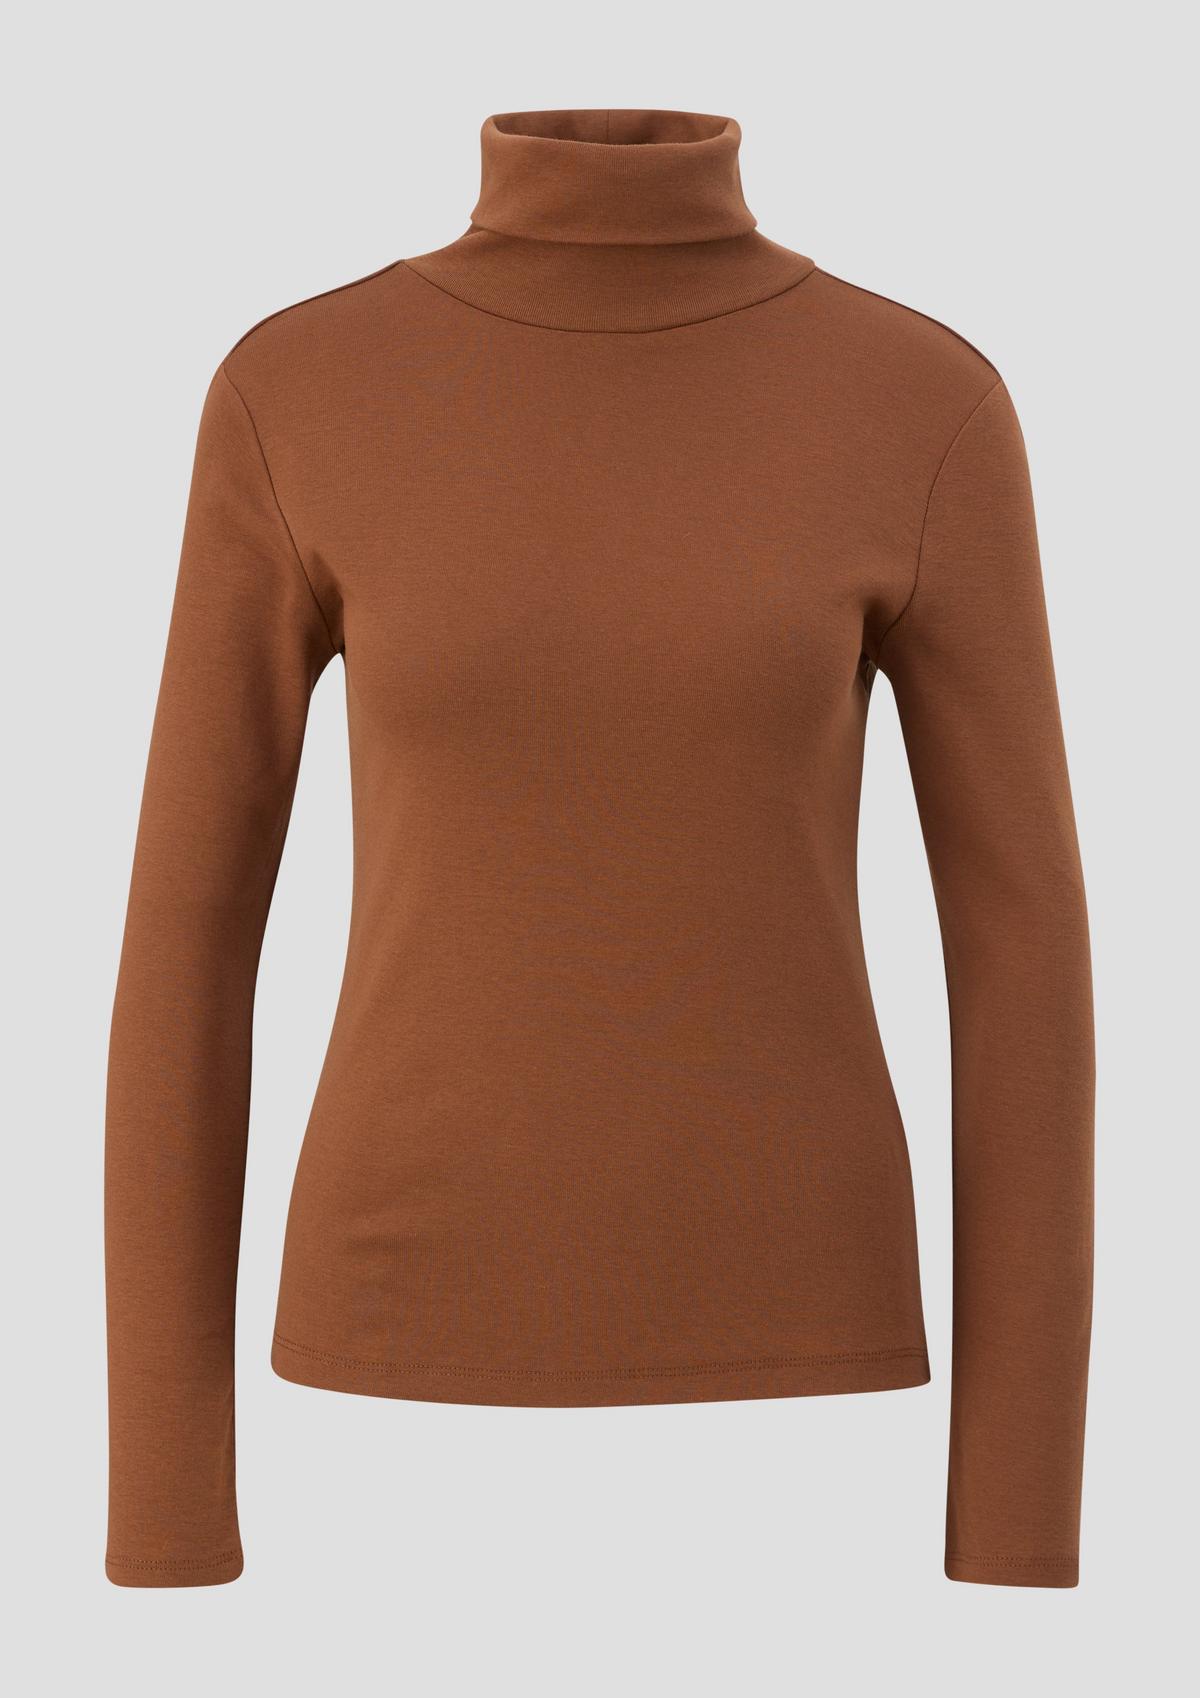 s.Oliver Polo neck top made of cotton